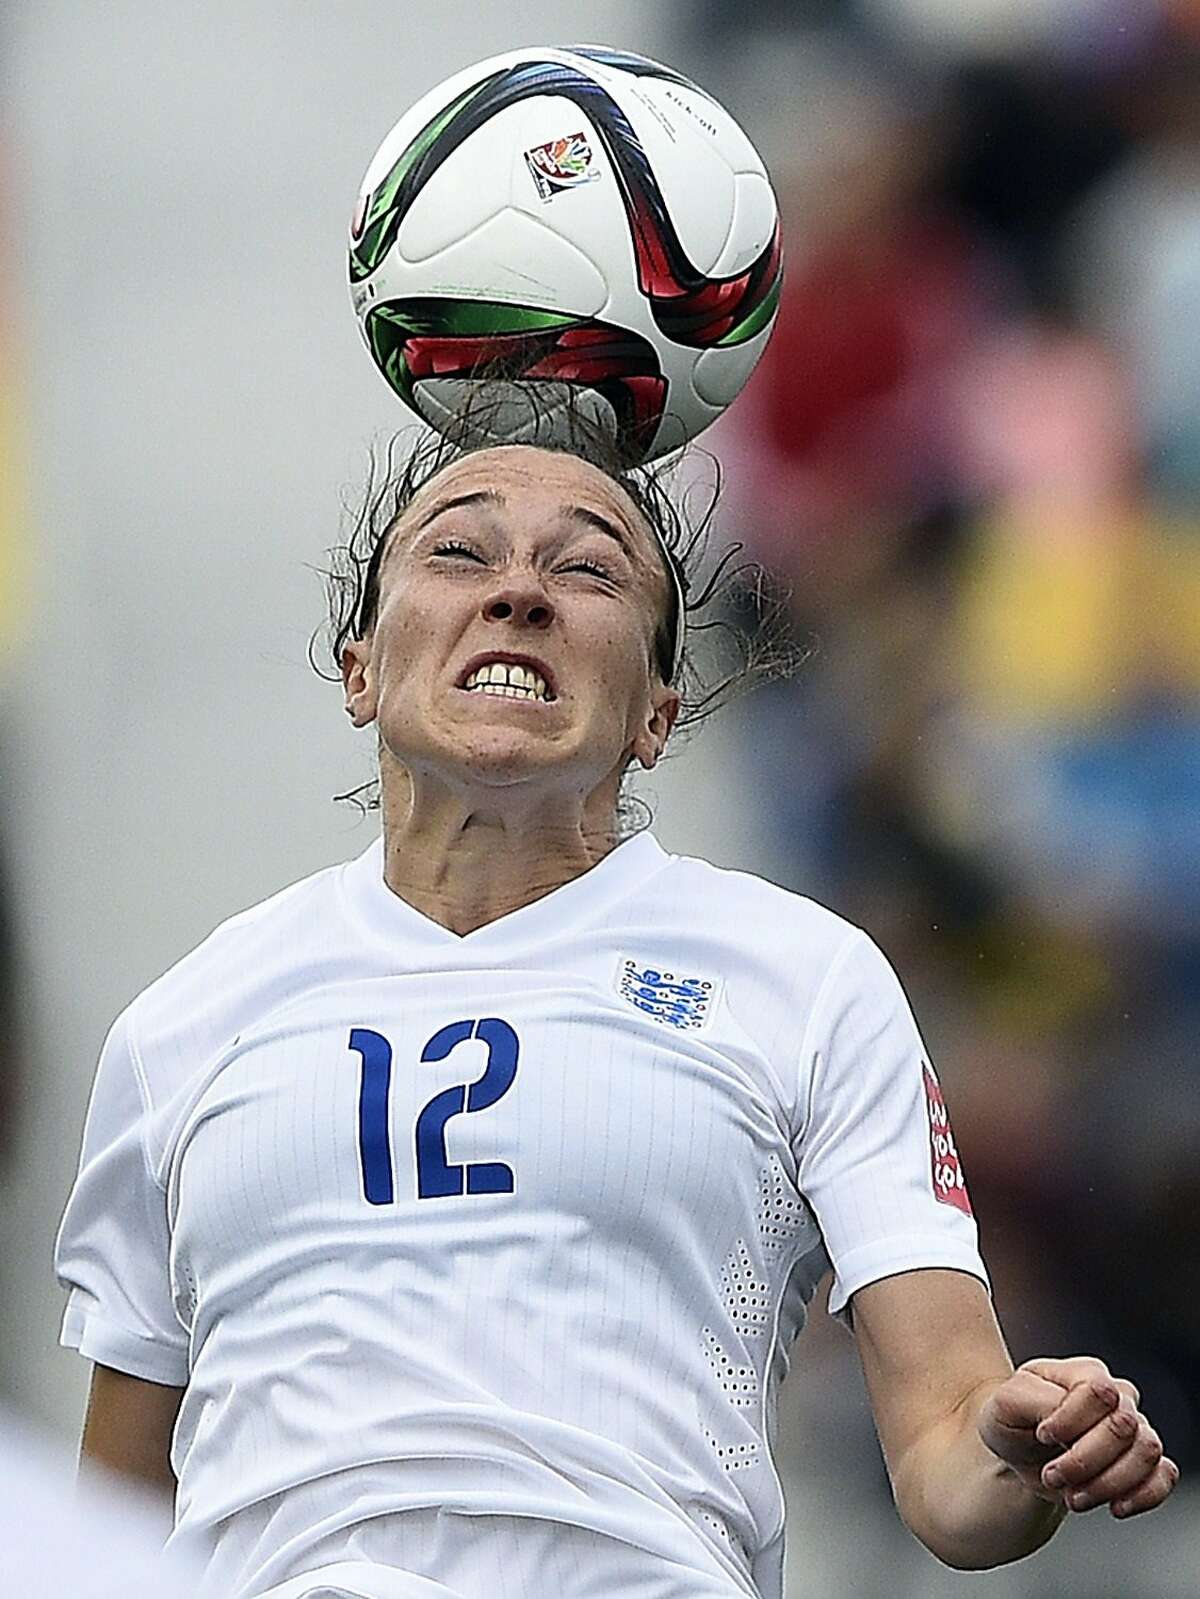 England's defender Lucy Bronze jumps for the ball during a Group F match at the 2015 FIFA Women's World Cup between France and England at Moncton Stadium on June 9, 2015 AFP PHOTO / FRANCK FIFEFRANCK FIFE/AFP/Getty Images